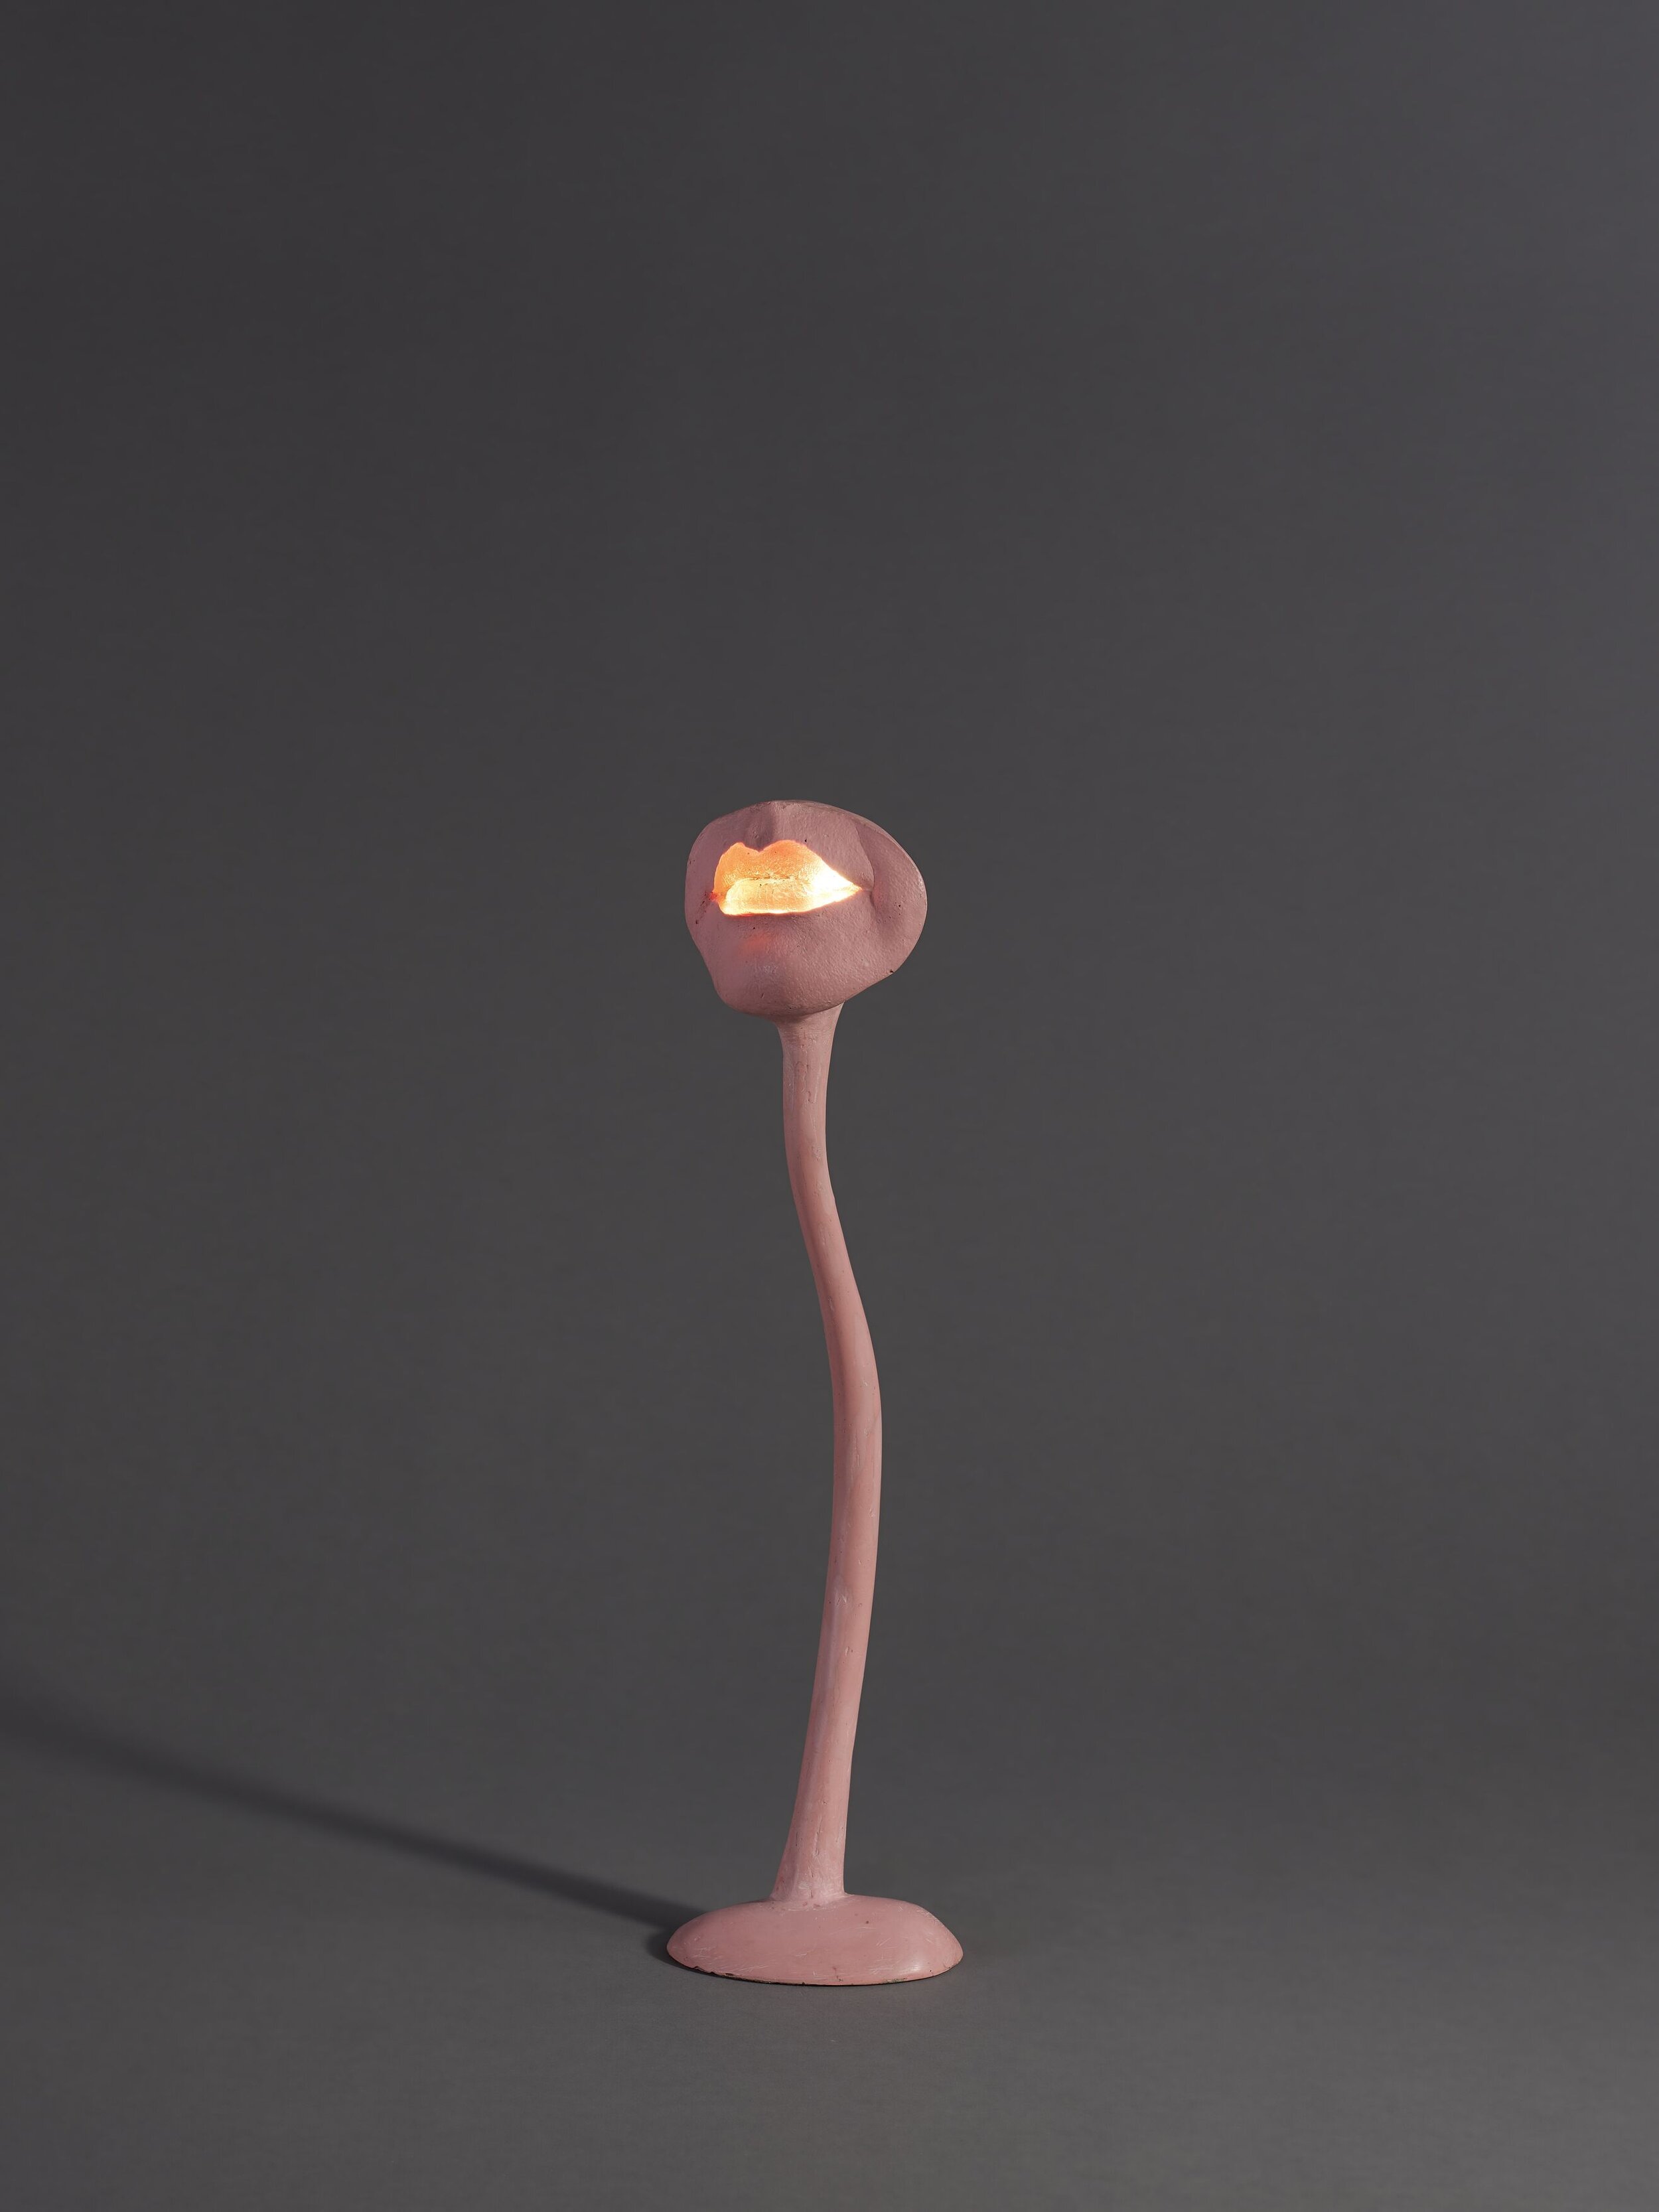  Lampe-bouche (Illuminated Lips) 1966 Coloured polyester resin, light bulb, electrical wiring and metal 36 x 11 x 8 cm / 14 1/8 x 4 3/8 x 3 1/8 in Photo: Thomas Barratt 